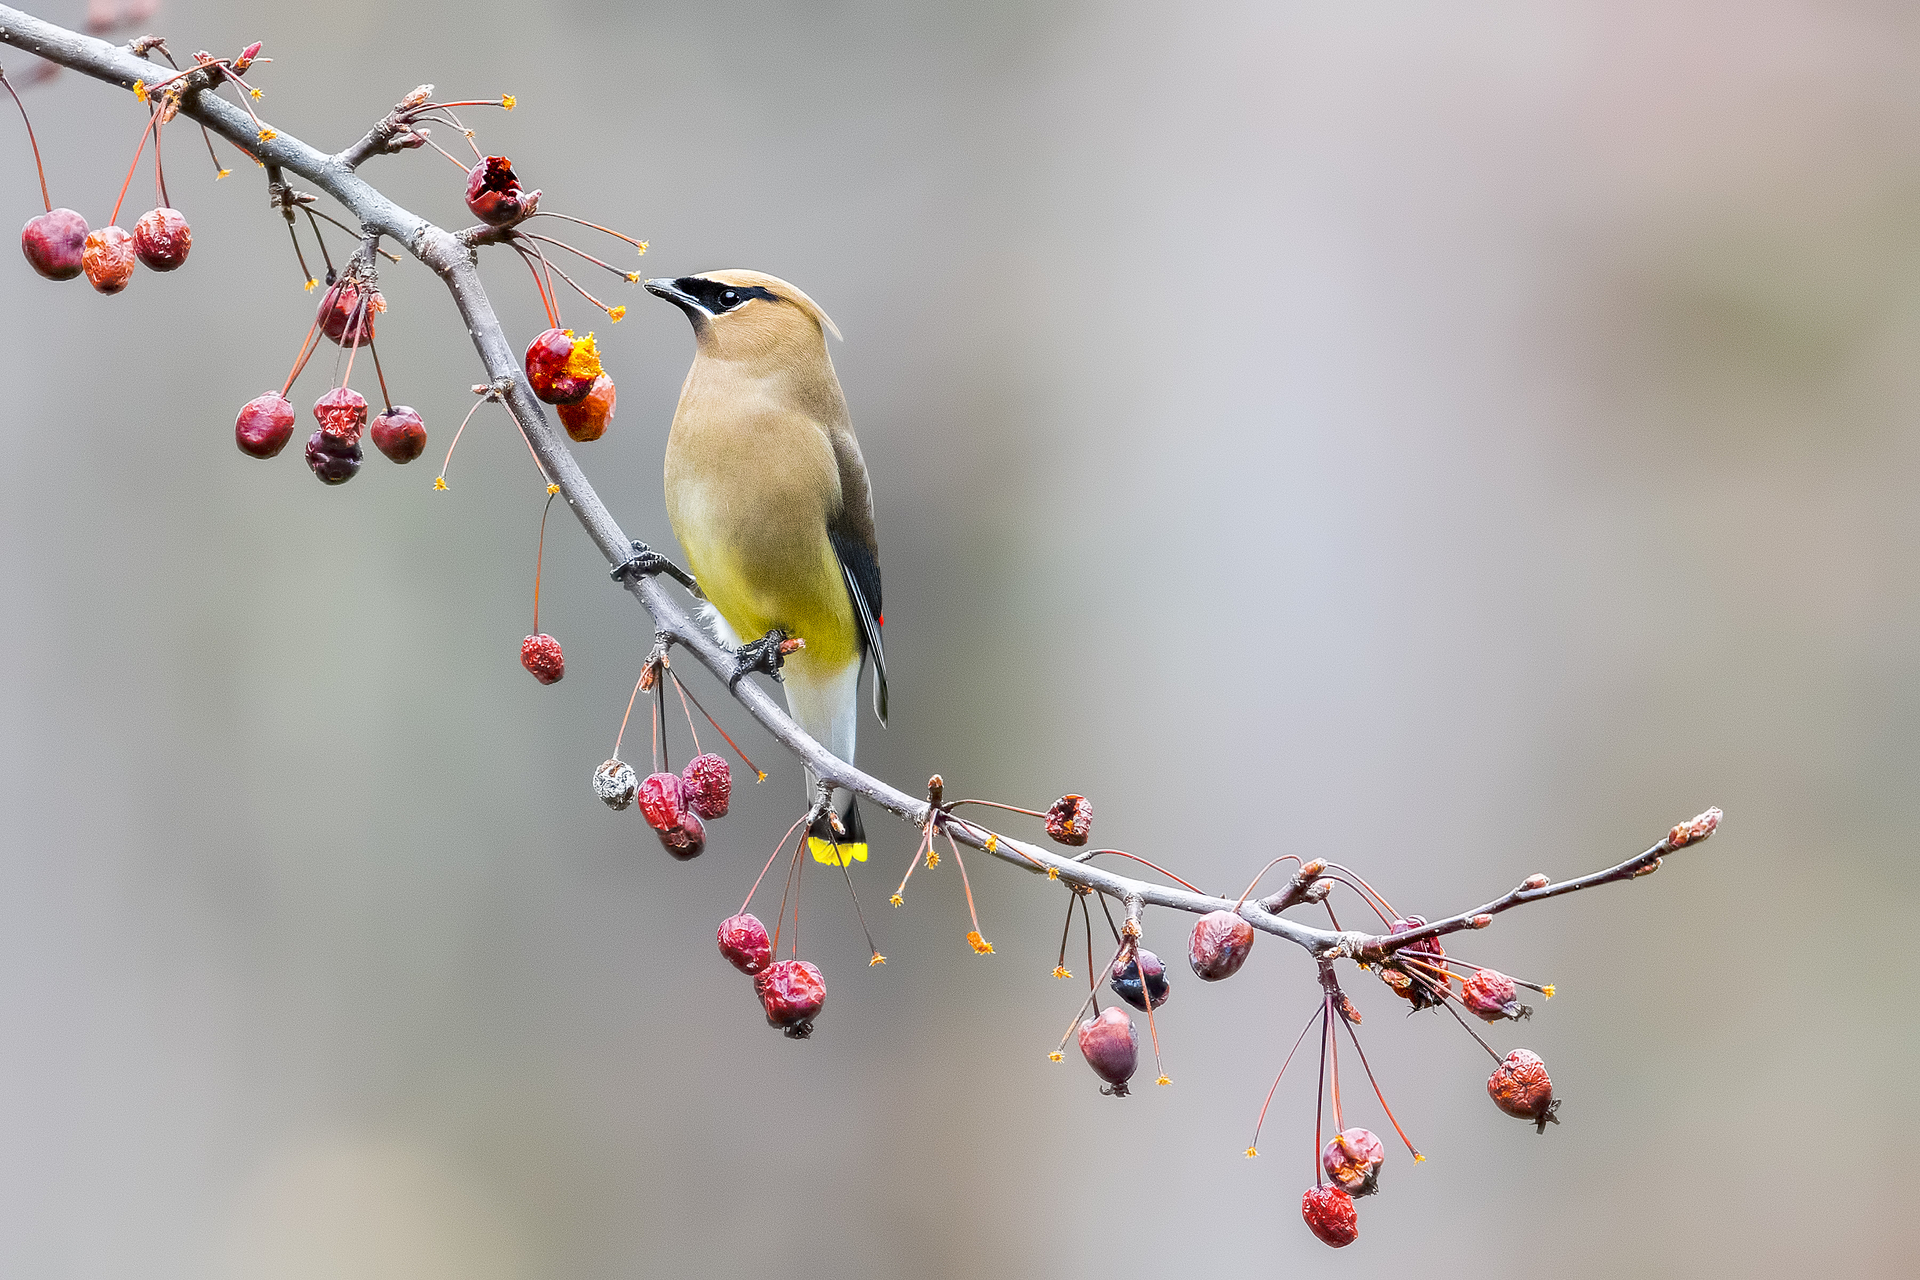 Cedar Waxwing on branch with dried berries